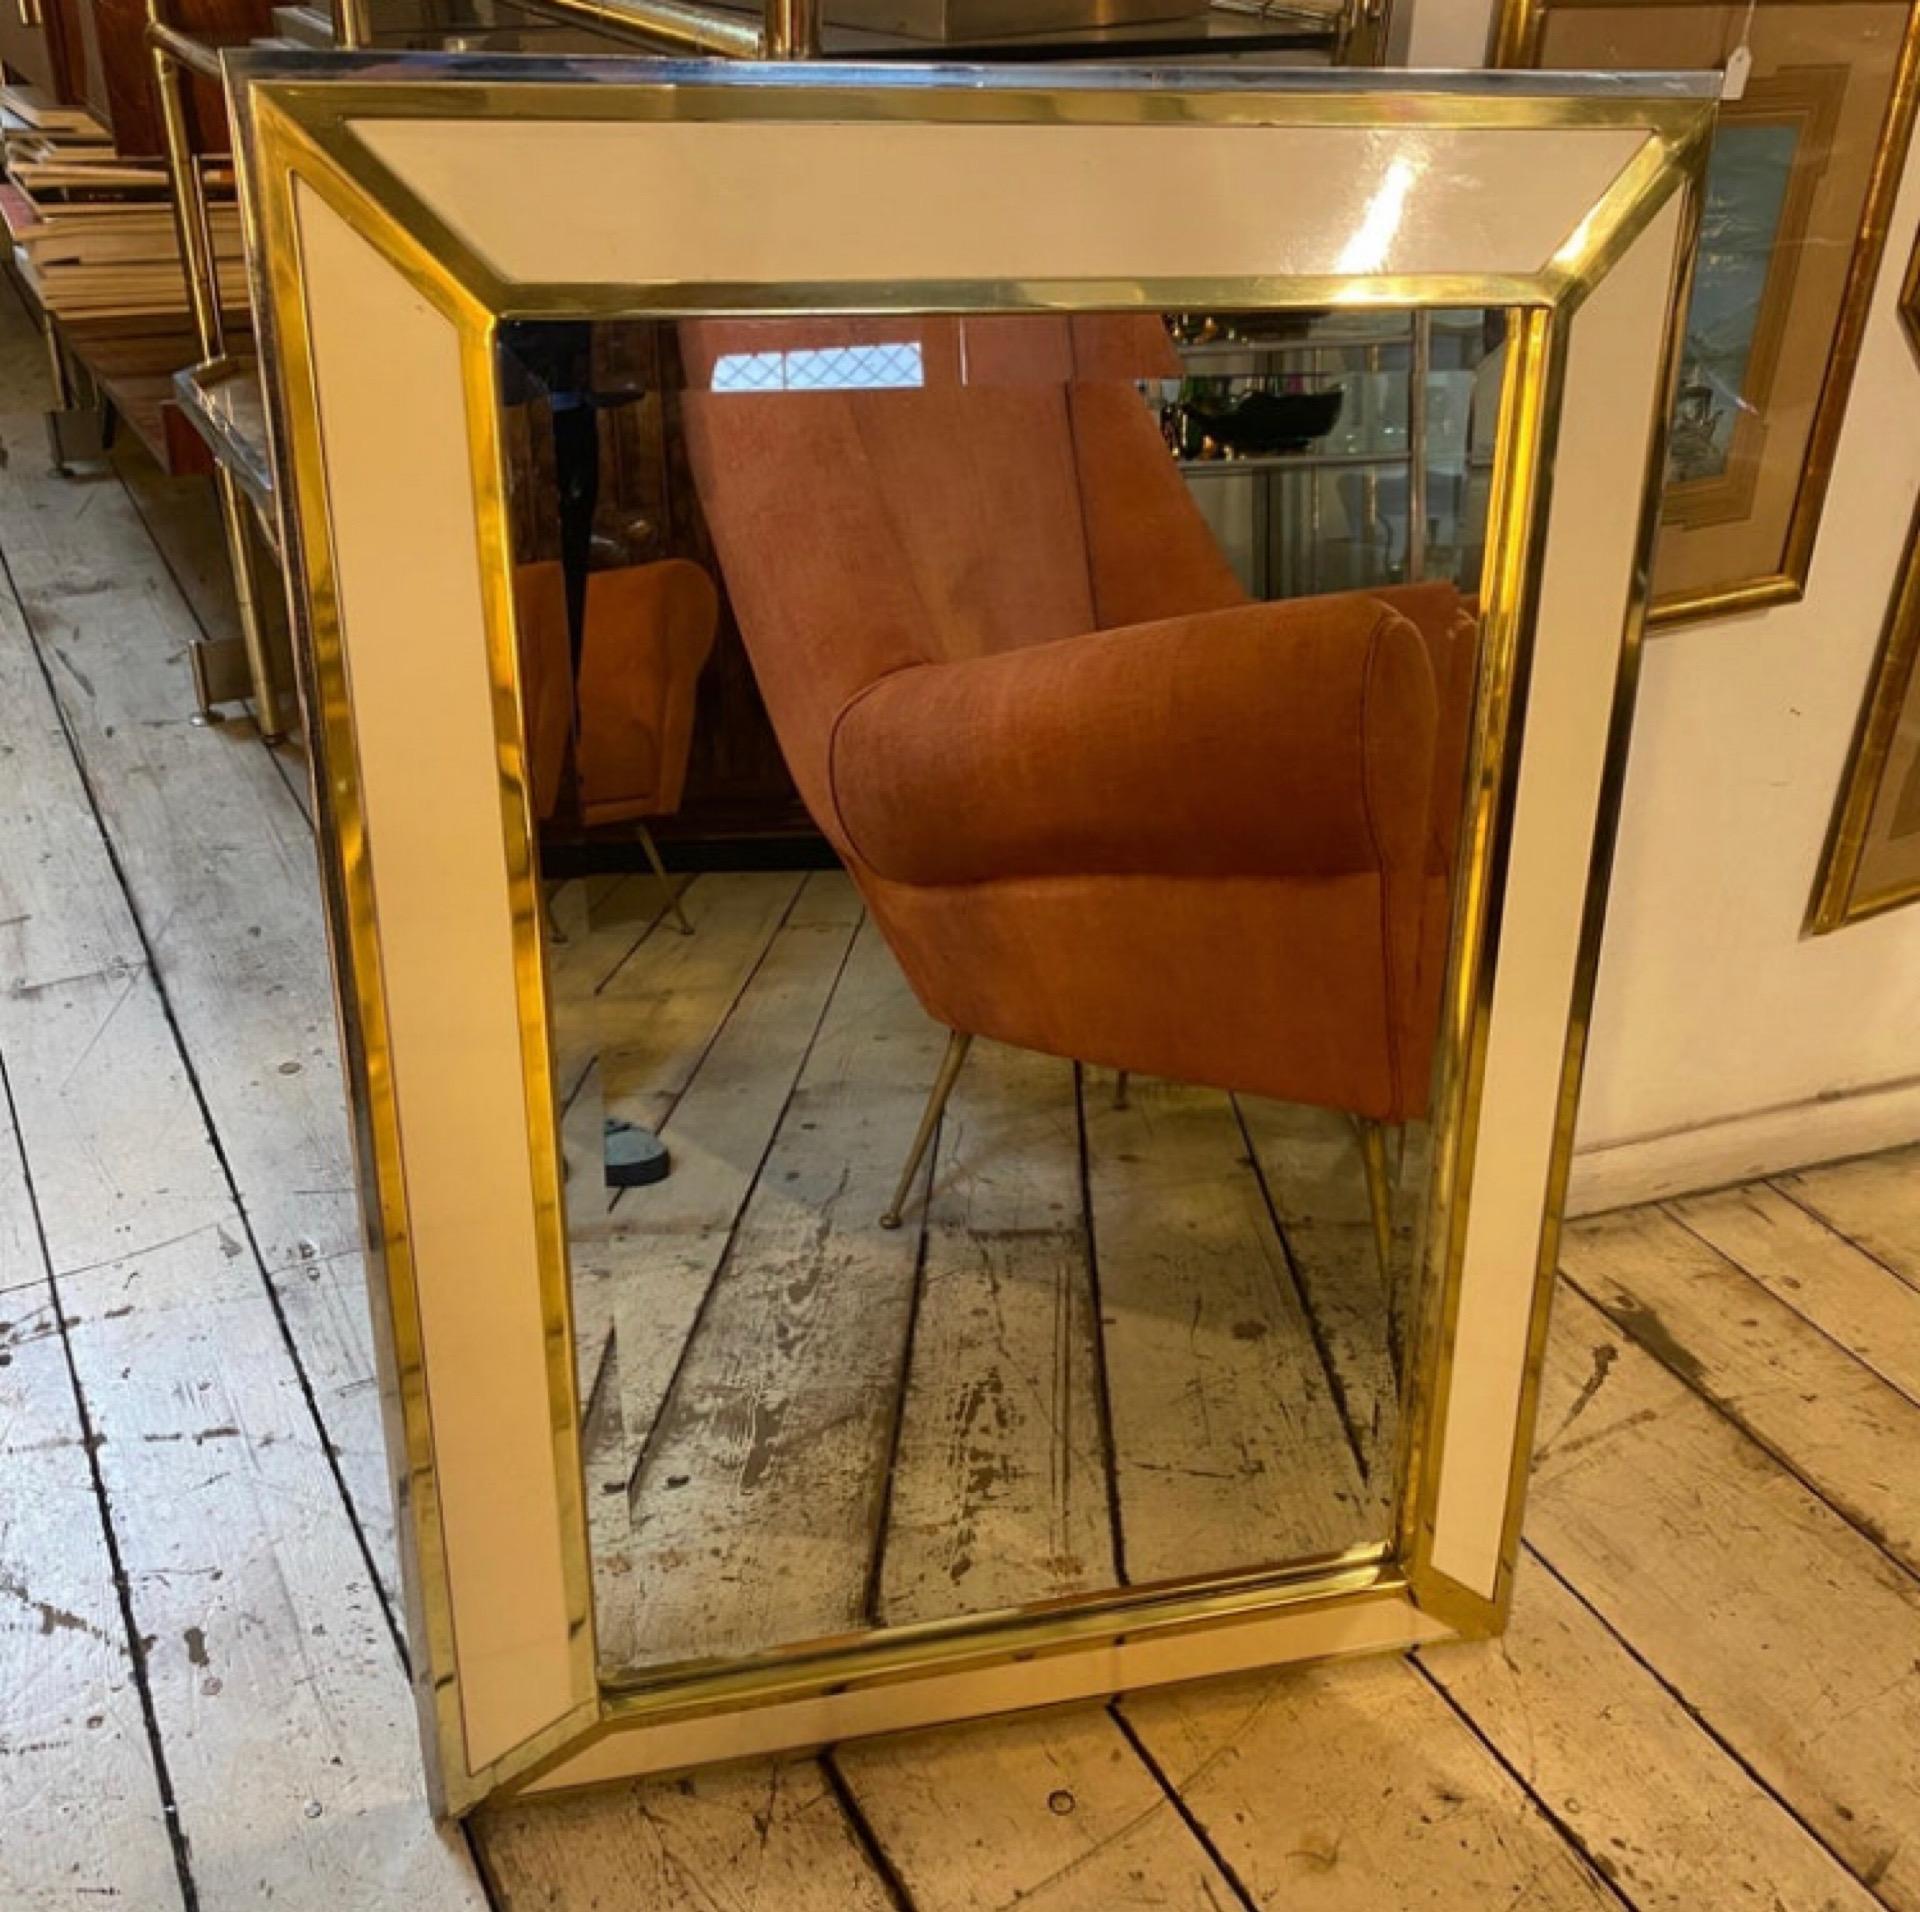 An amazing huge wall mirror made in Italy in the Seventies, chromed metal and brass parts are in perfect conditions like the mirror glass, the white panels gives it an elegant vintage look. The shape and the materials are in the style of the famous